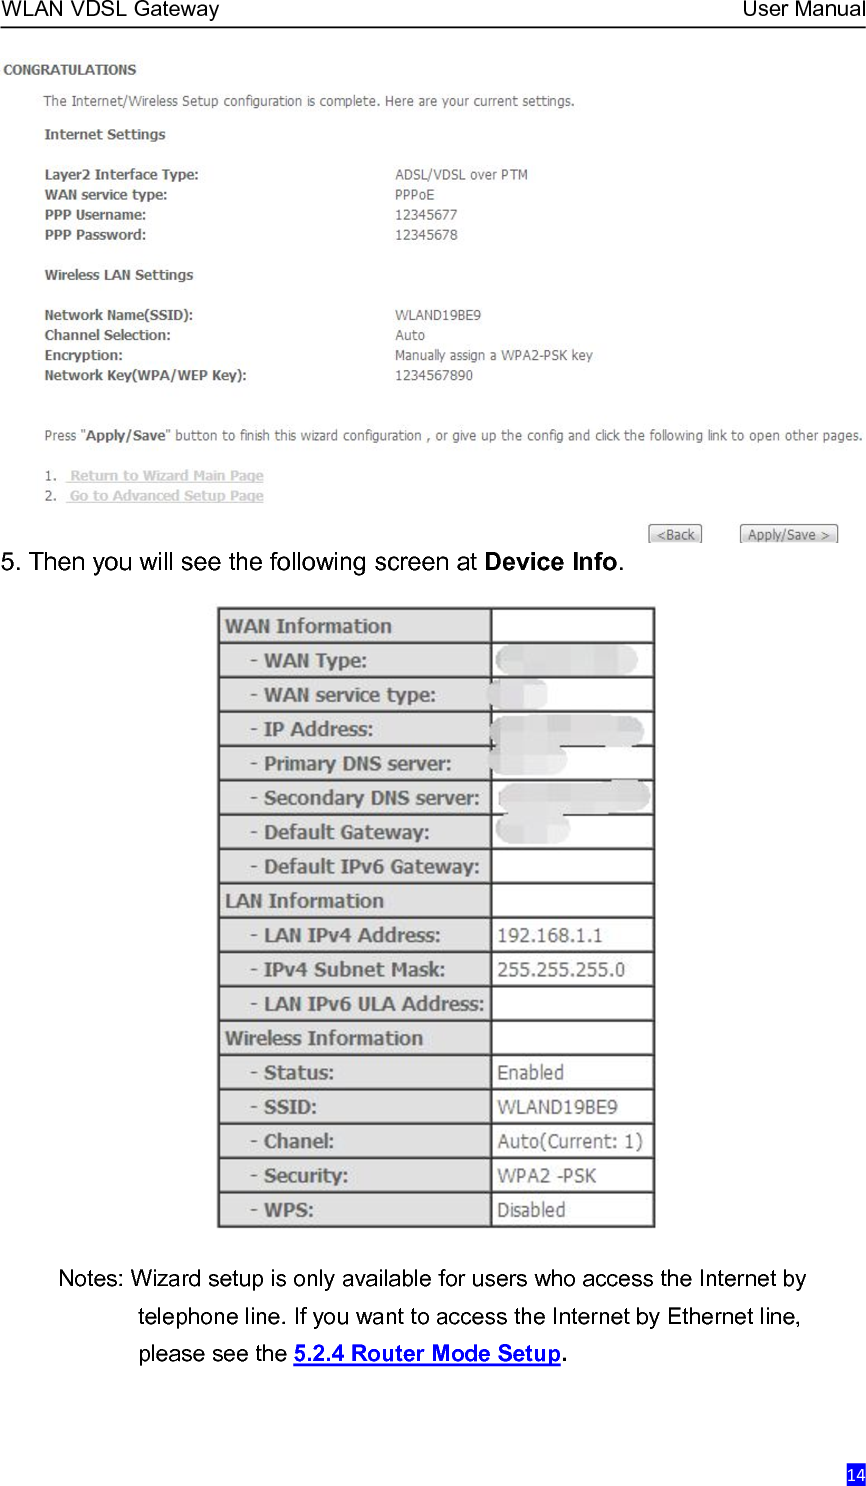 WLAN VDSL Gateway User Manual145. Then you will see the following screen at Device Info.Notes: Wizard setup is only available for users who access the Internet bytelephone line. If you want to access the Internet by Ethernet line,please see the 5.2.4 Router Mode Setup.